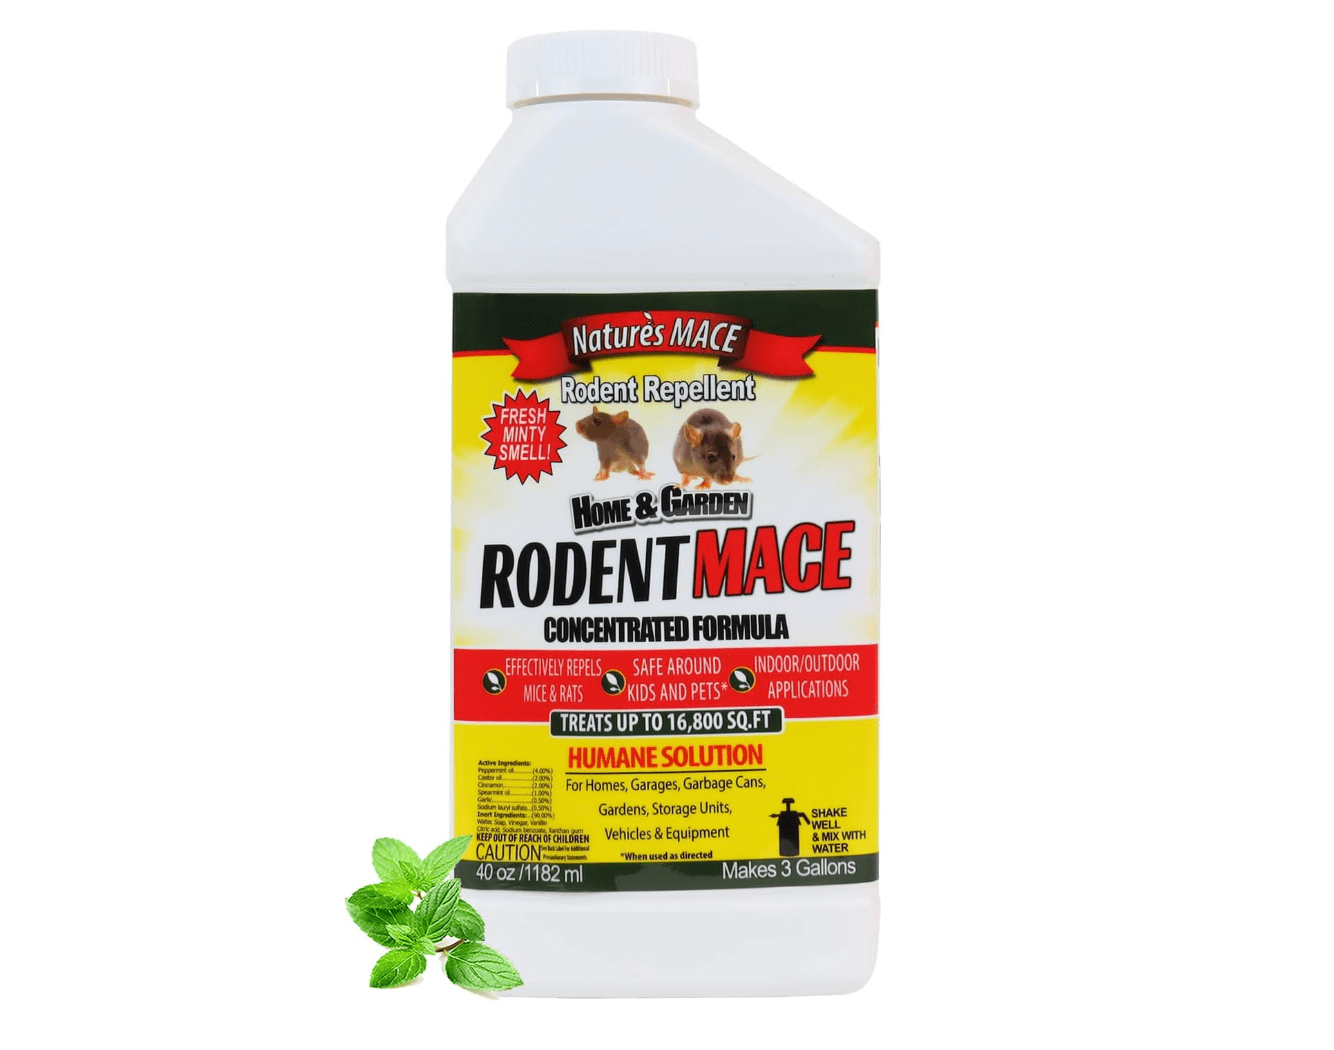 A white gallon bottle of Rodent Mace